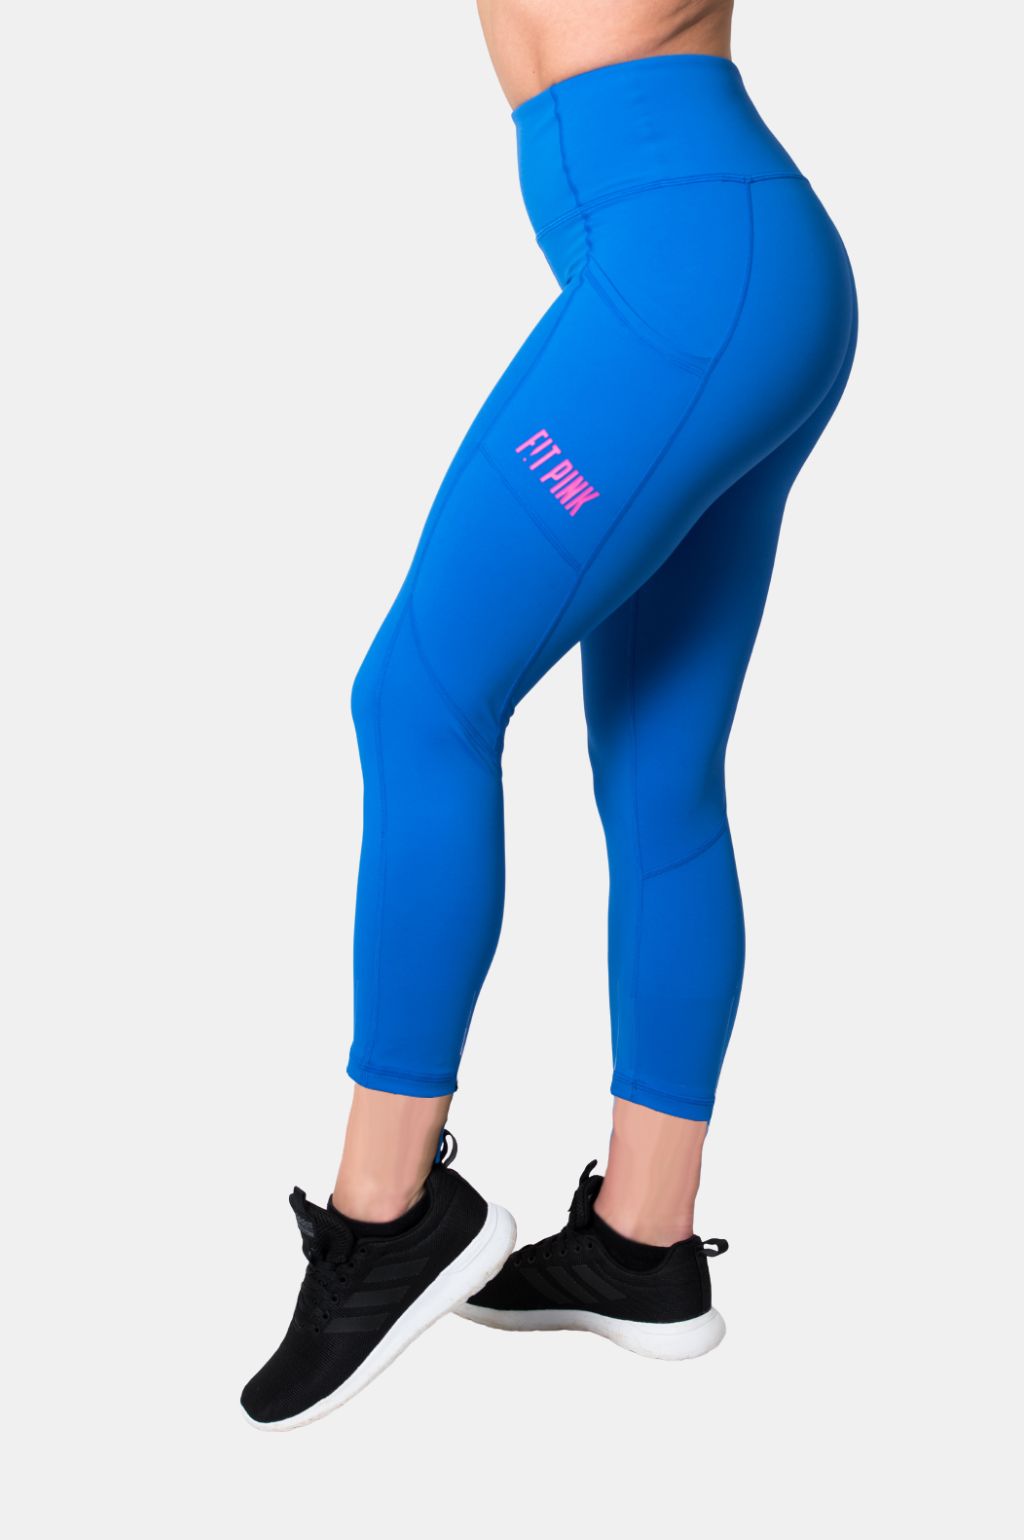 Stylish Gym Outfit with Blue Leggings